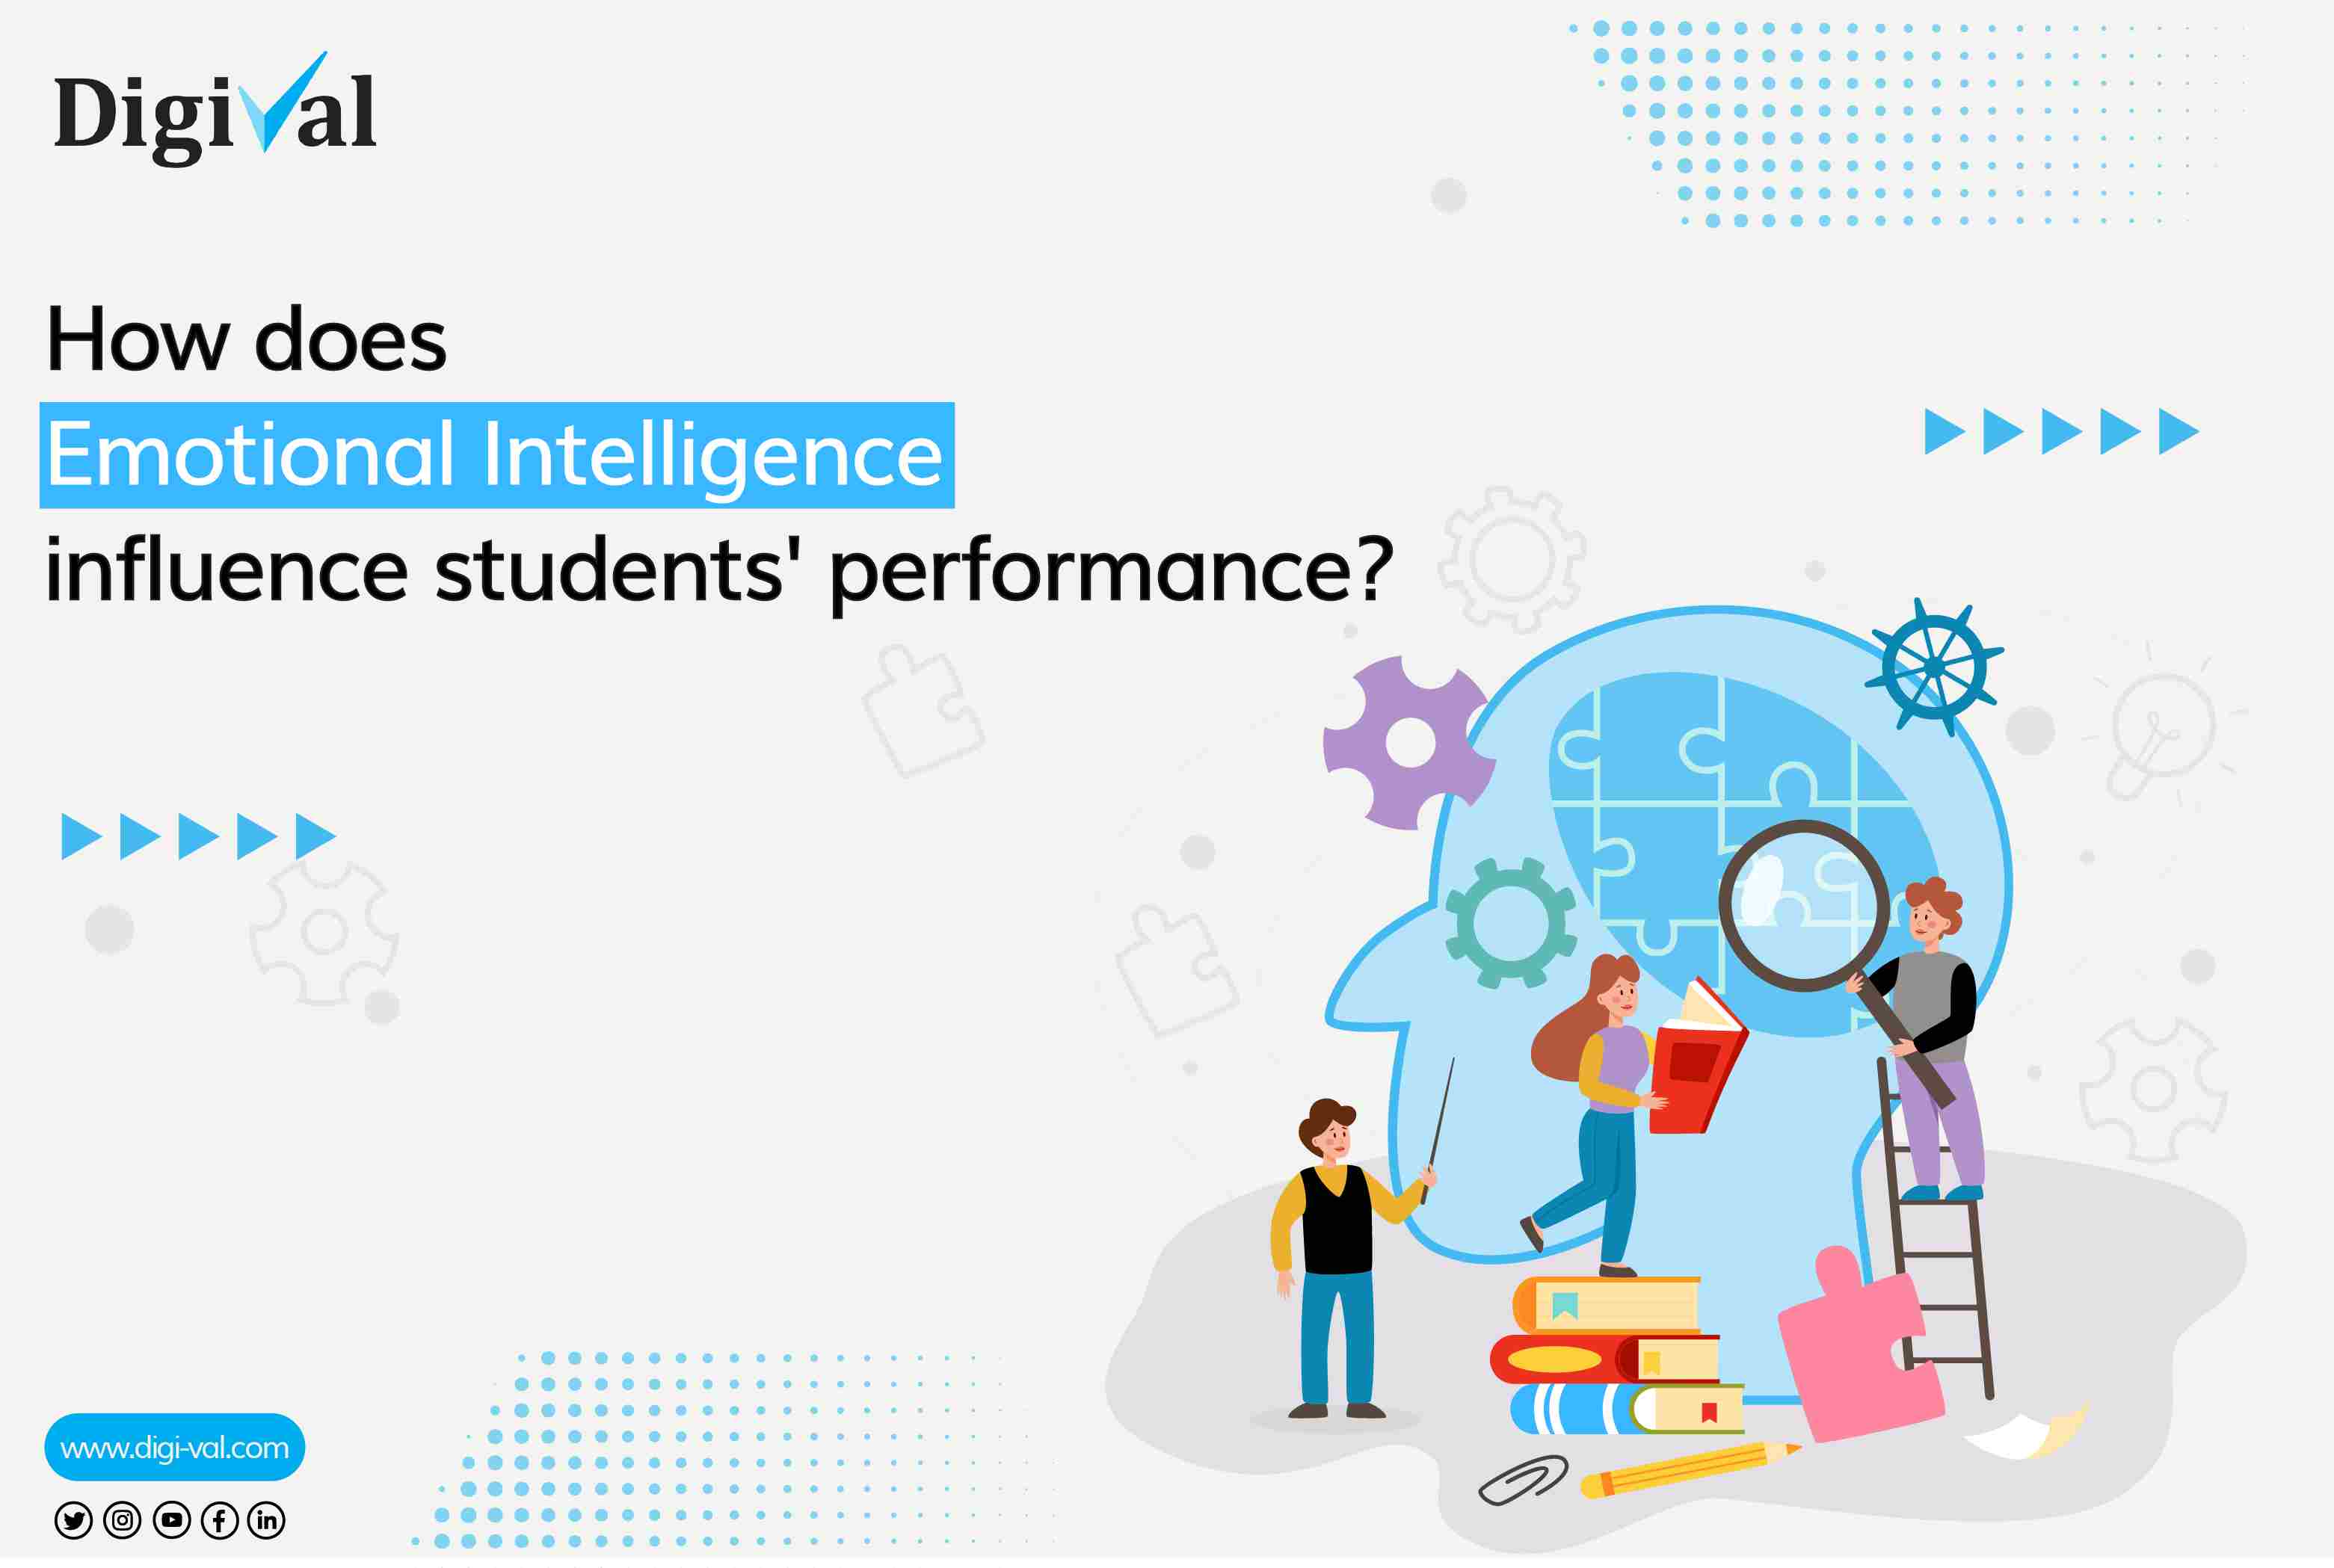 How does emotional intelligence influence students' performance?